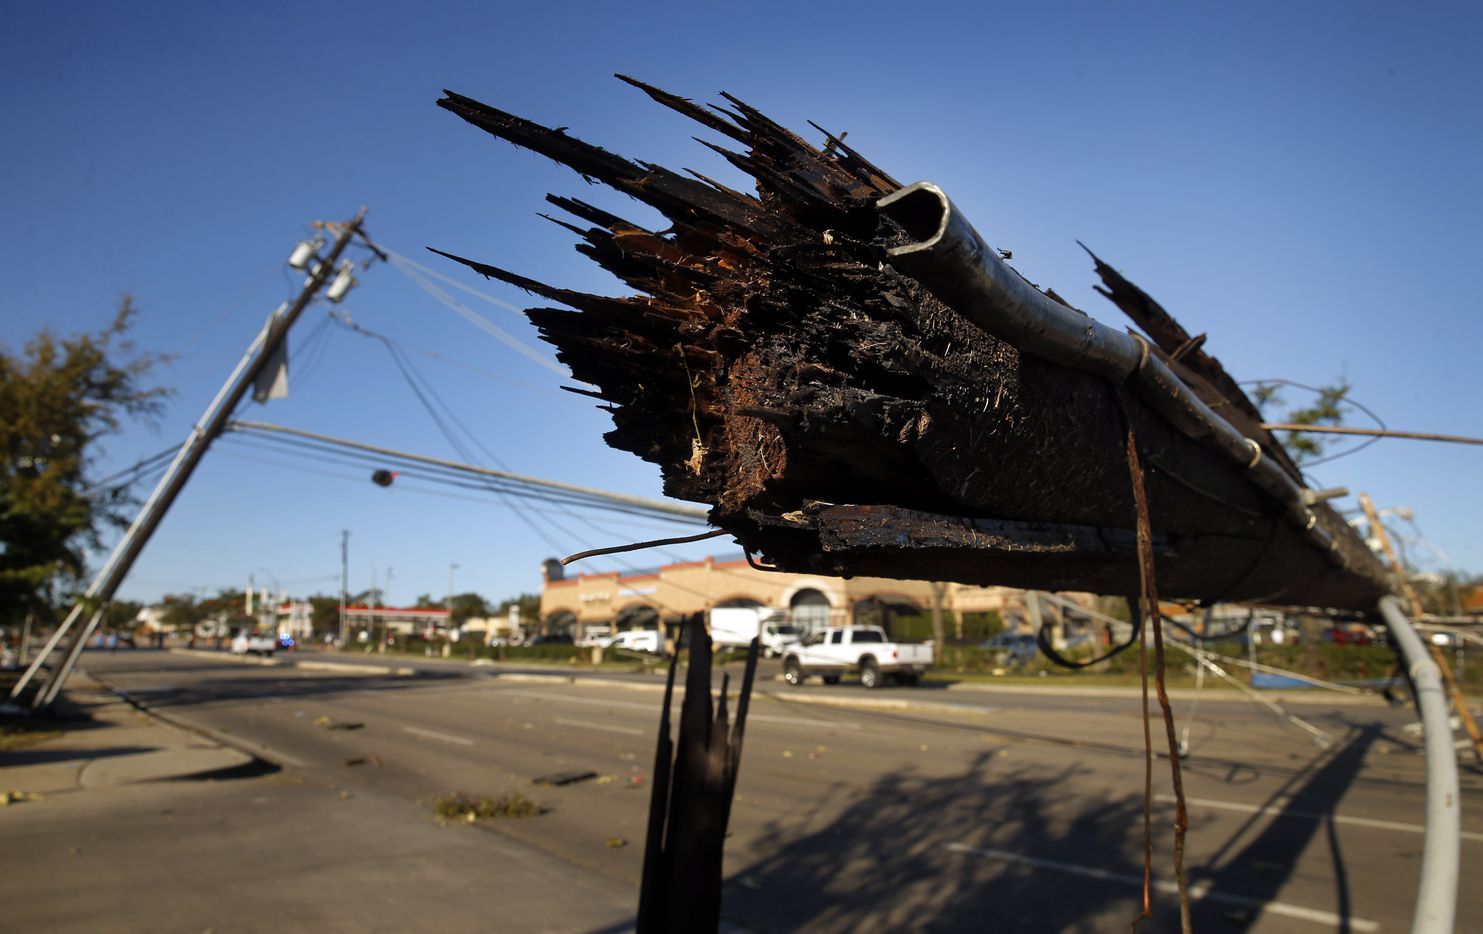 A sheared off utility pole lays over Preston Rd in Dallas near the Preston Royal shopping center Monday, October 21, 2019. A tornado tore through the entire neighborhood knocking down trees and ripping roofs from homes and businesses.